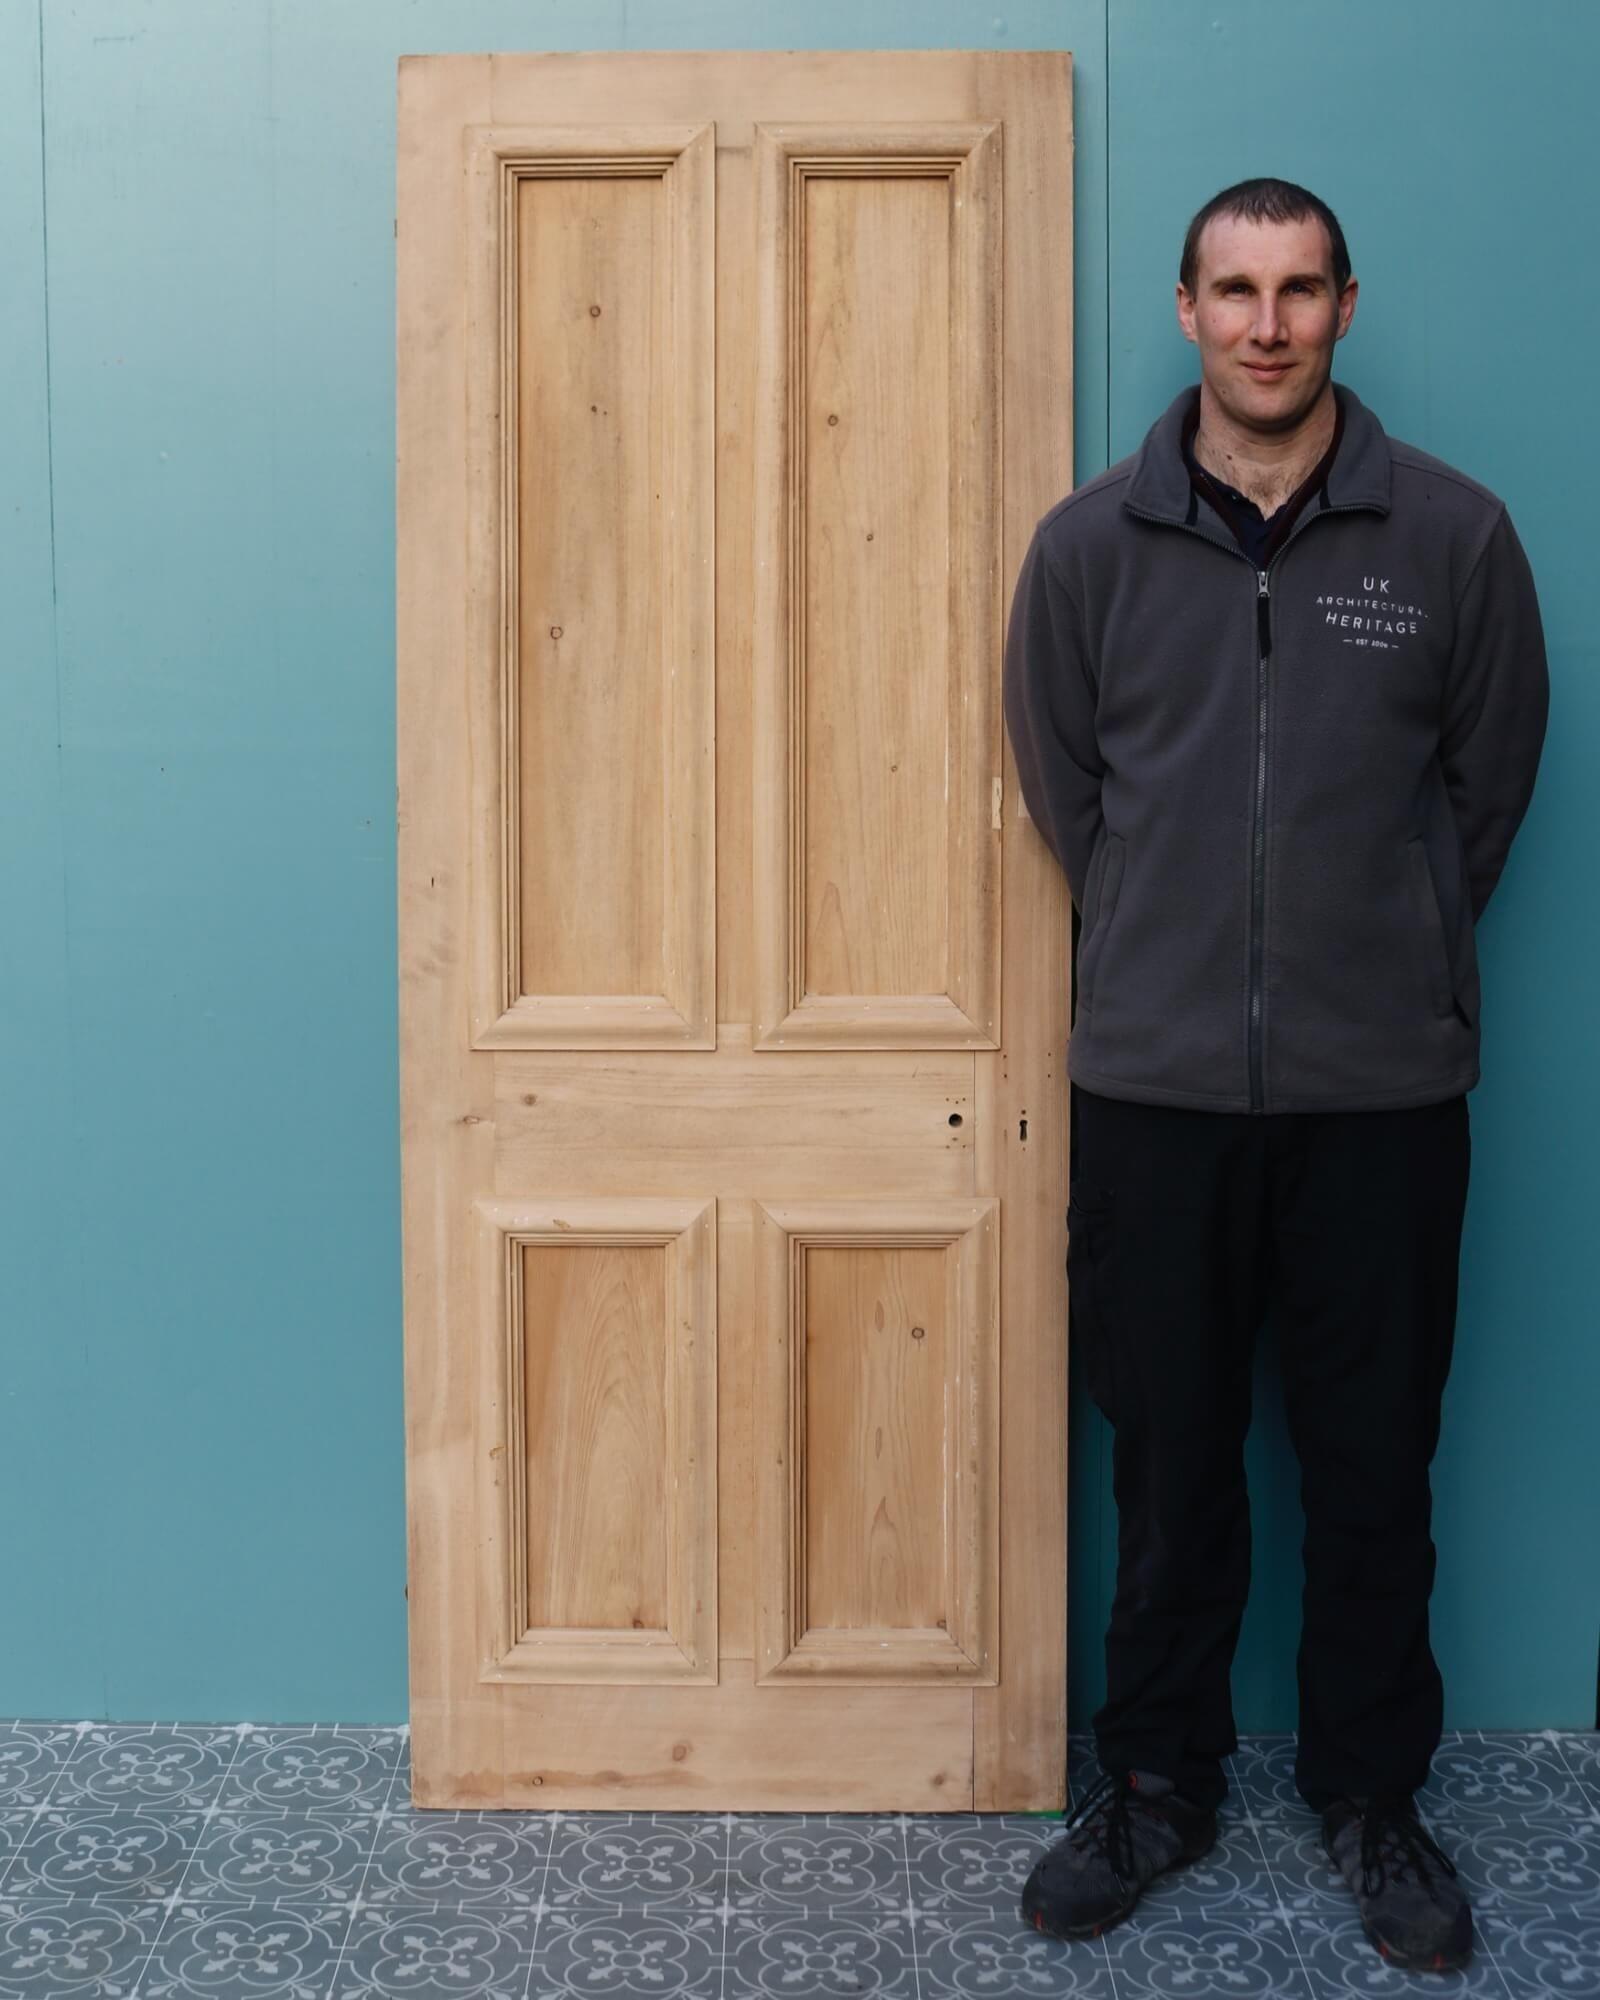 A reclaimed 4-panel Victorian internal or external door dating from the 1890s. Moulding is different on each side. Perfect for an Edwardian townhouse or Victorian cottage. Made in pine, this antique door is stripped and sanded, ready for finishing